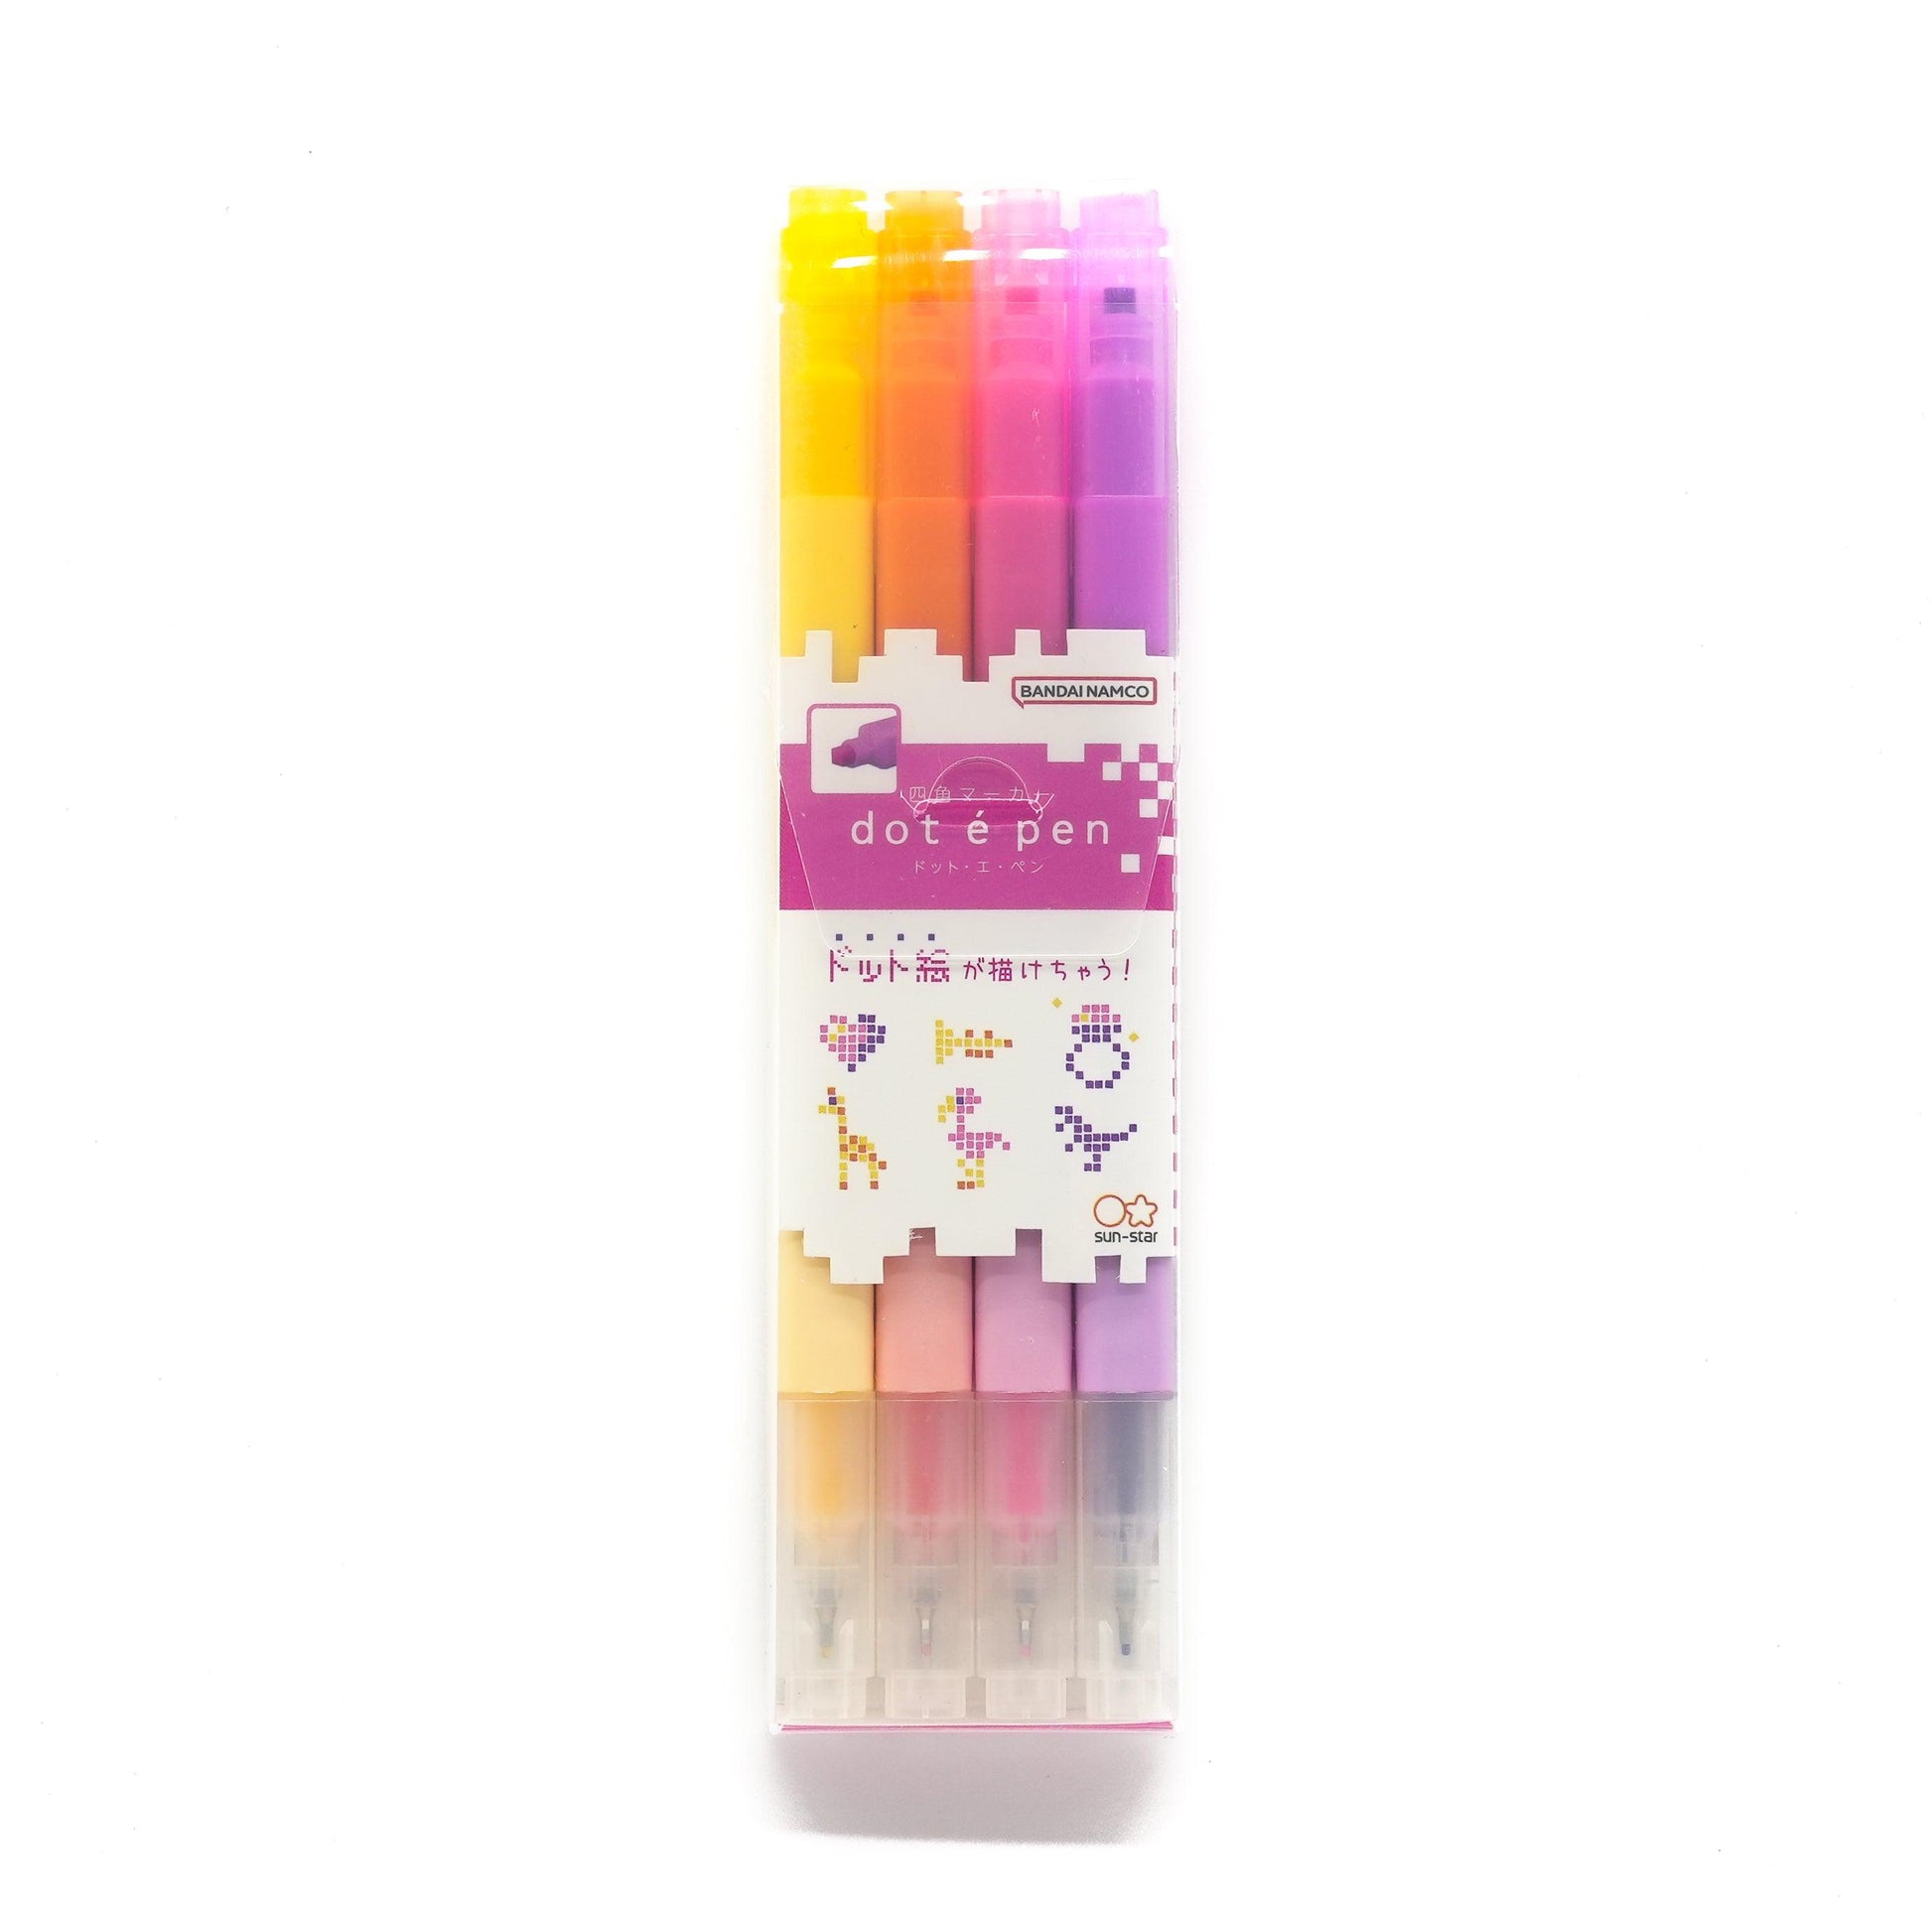 https://chl-store.com/cdn/shop/products/highlighter-sun-star-dot-e-pen-water-based-four-corners-2-brushes-marker-painting-marker-art-supplies-stationery-creativity-art-student-office-girls-4-color-set-s4541-chl-store-2.jpg?v=1695885506&width=1946